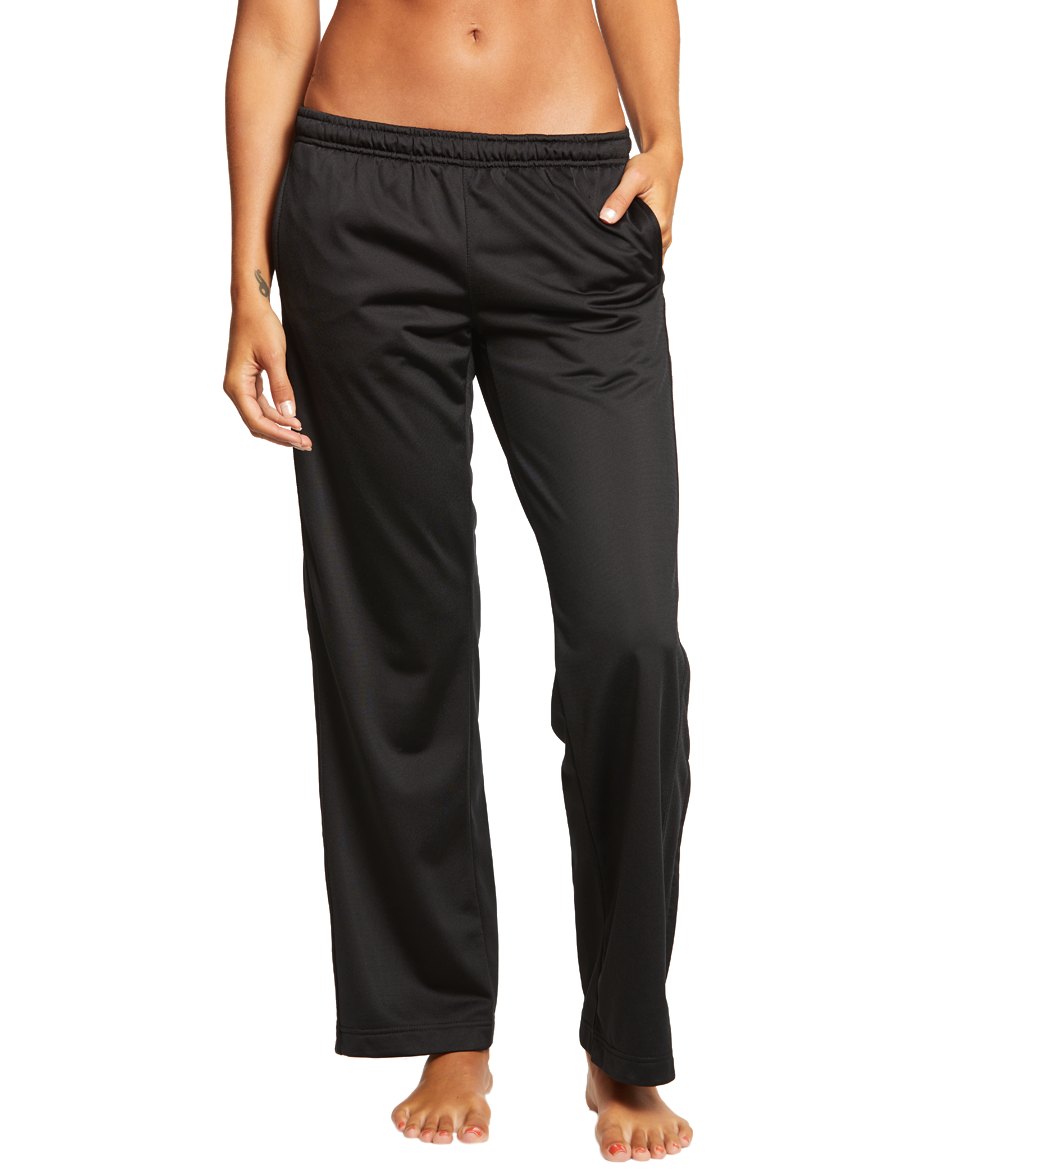 Women's Tricot Track Pant at SwimOutlet.com